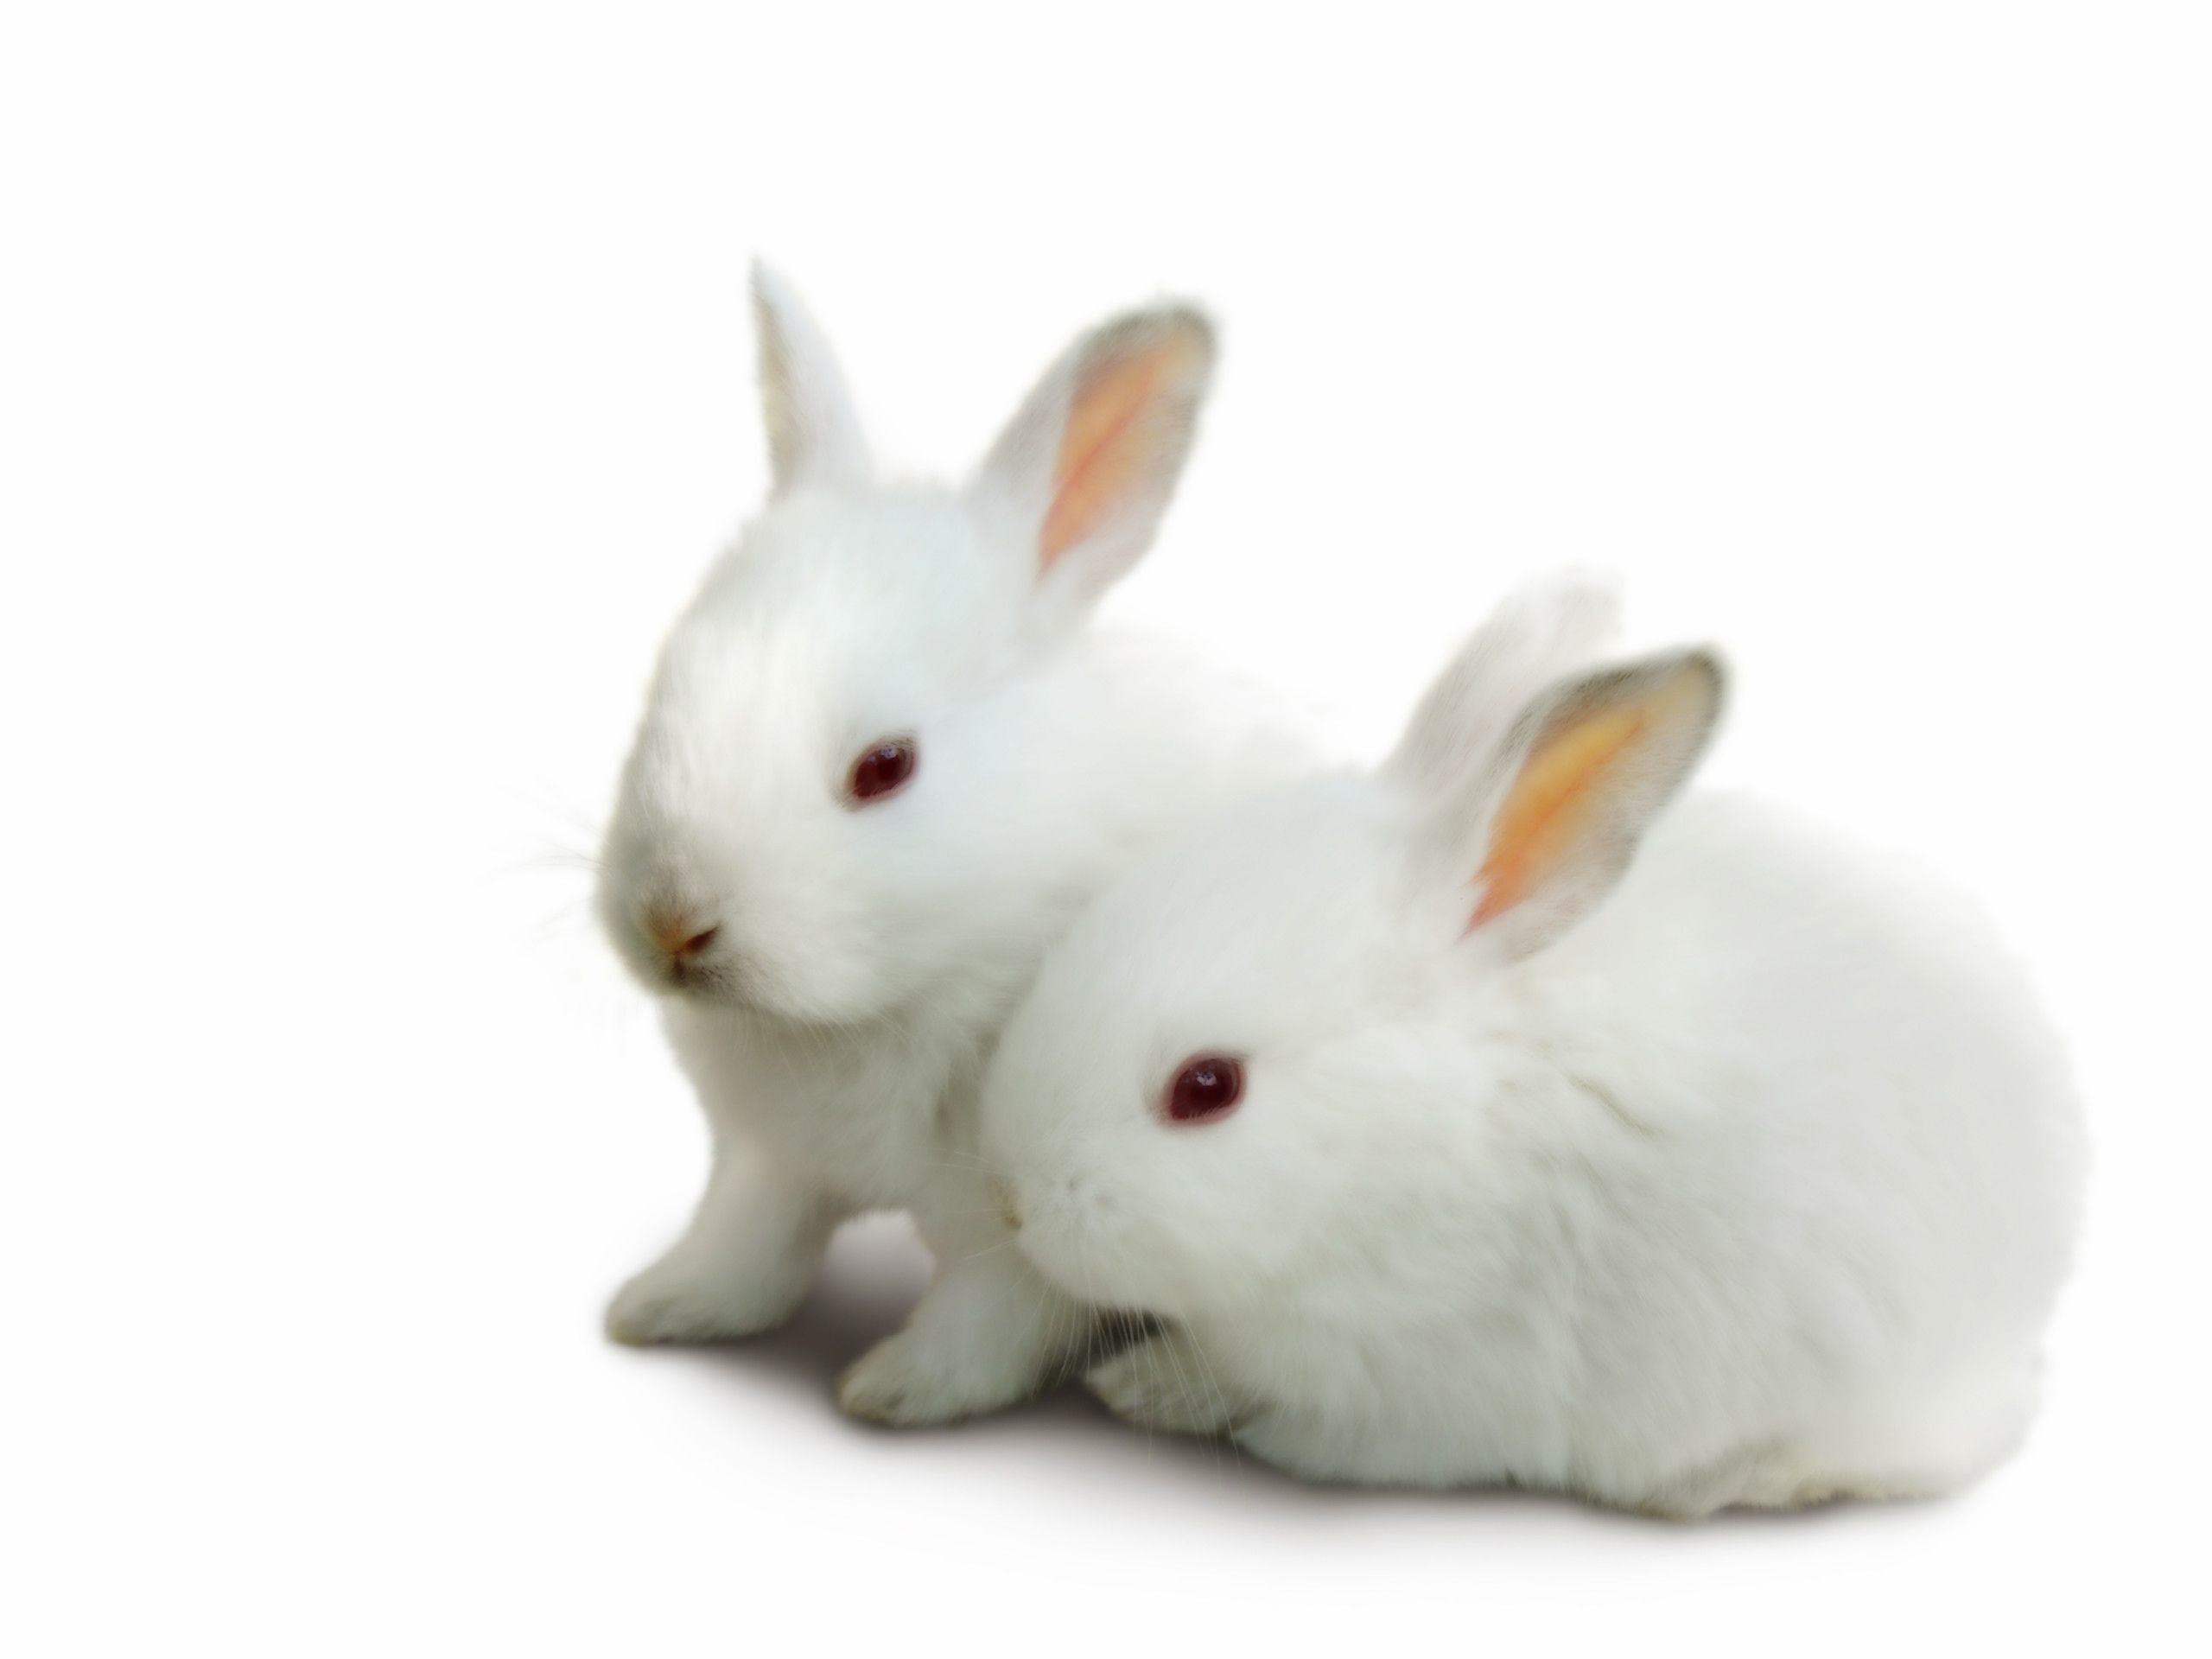 2560x1920 ... White Rabbit Wallpapers - Wallpaper Cave ...